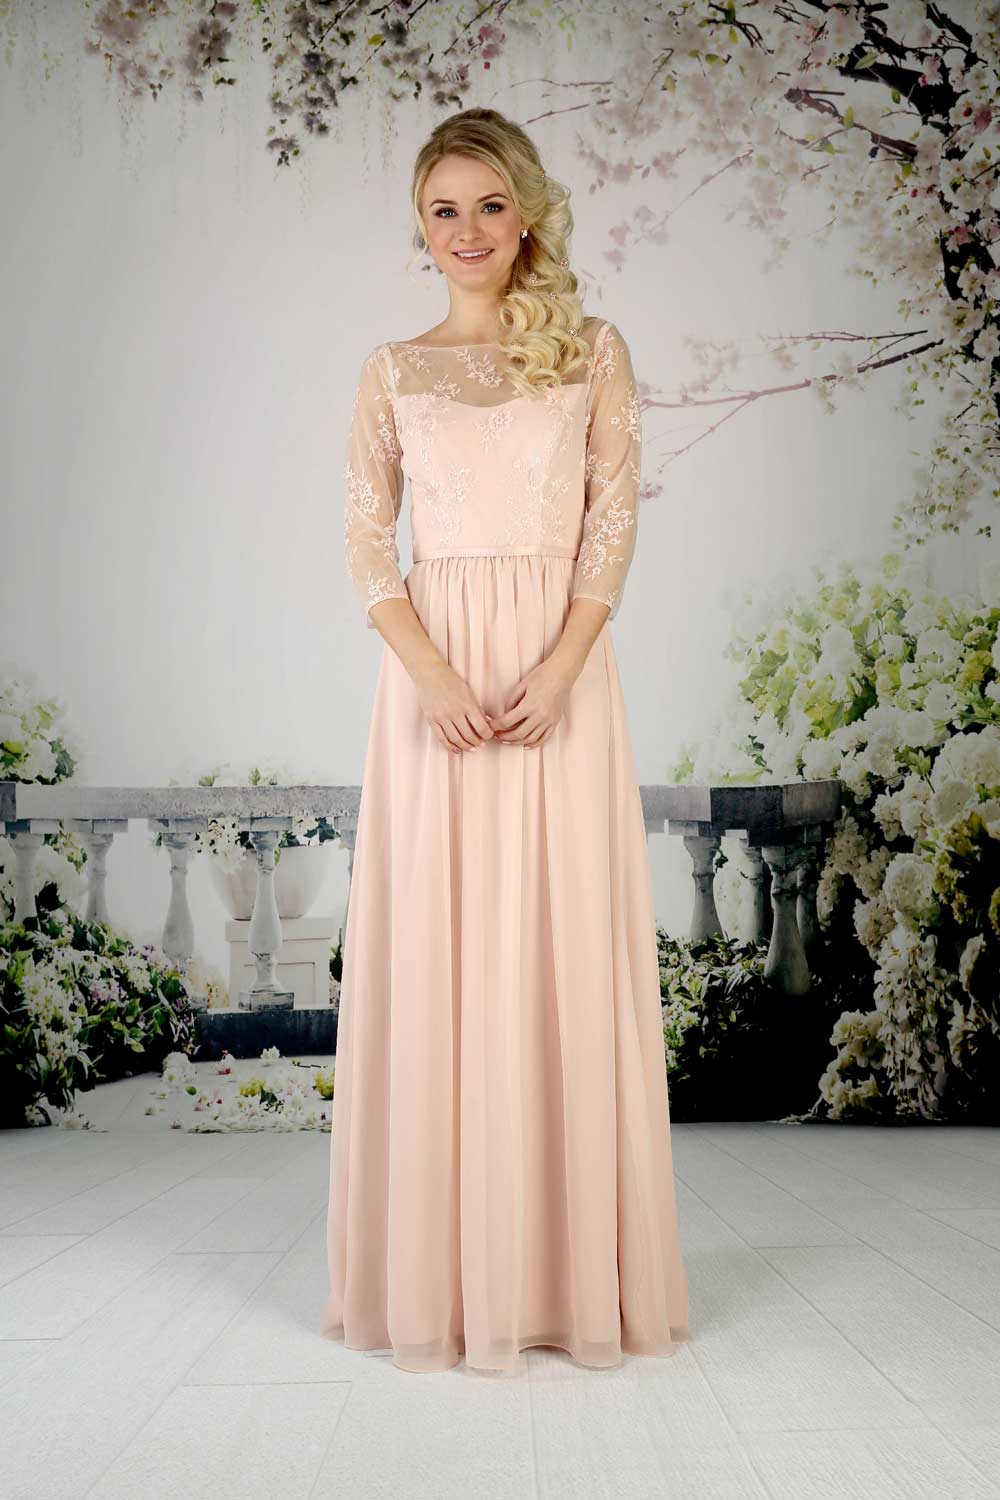 Gathered chiffon skirt with an embroidered lace bodice